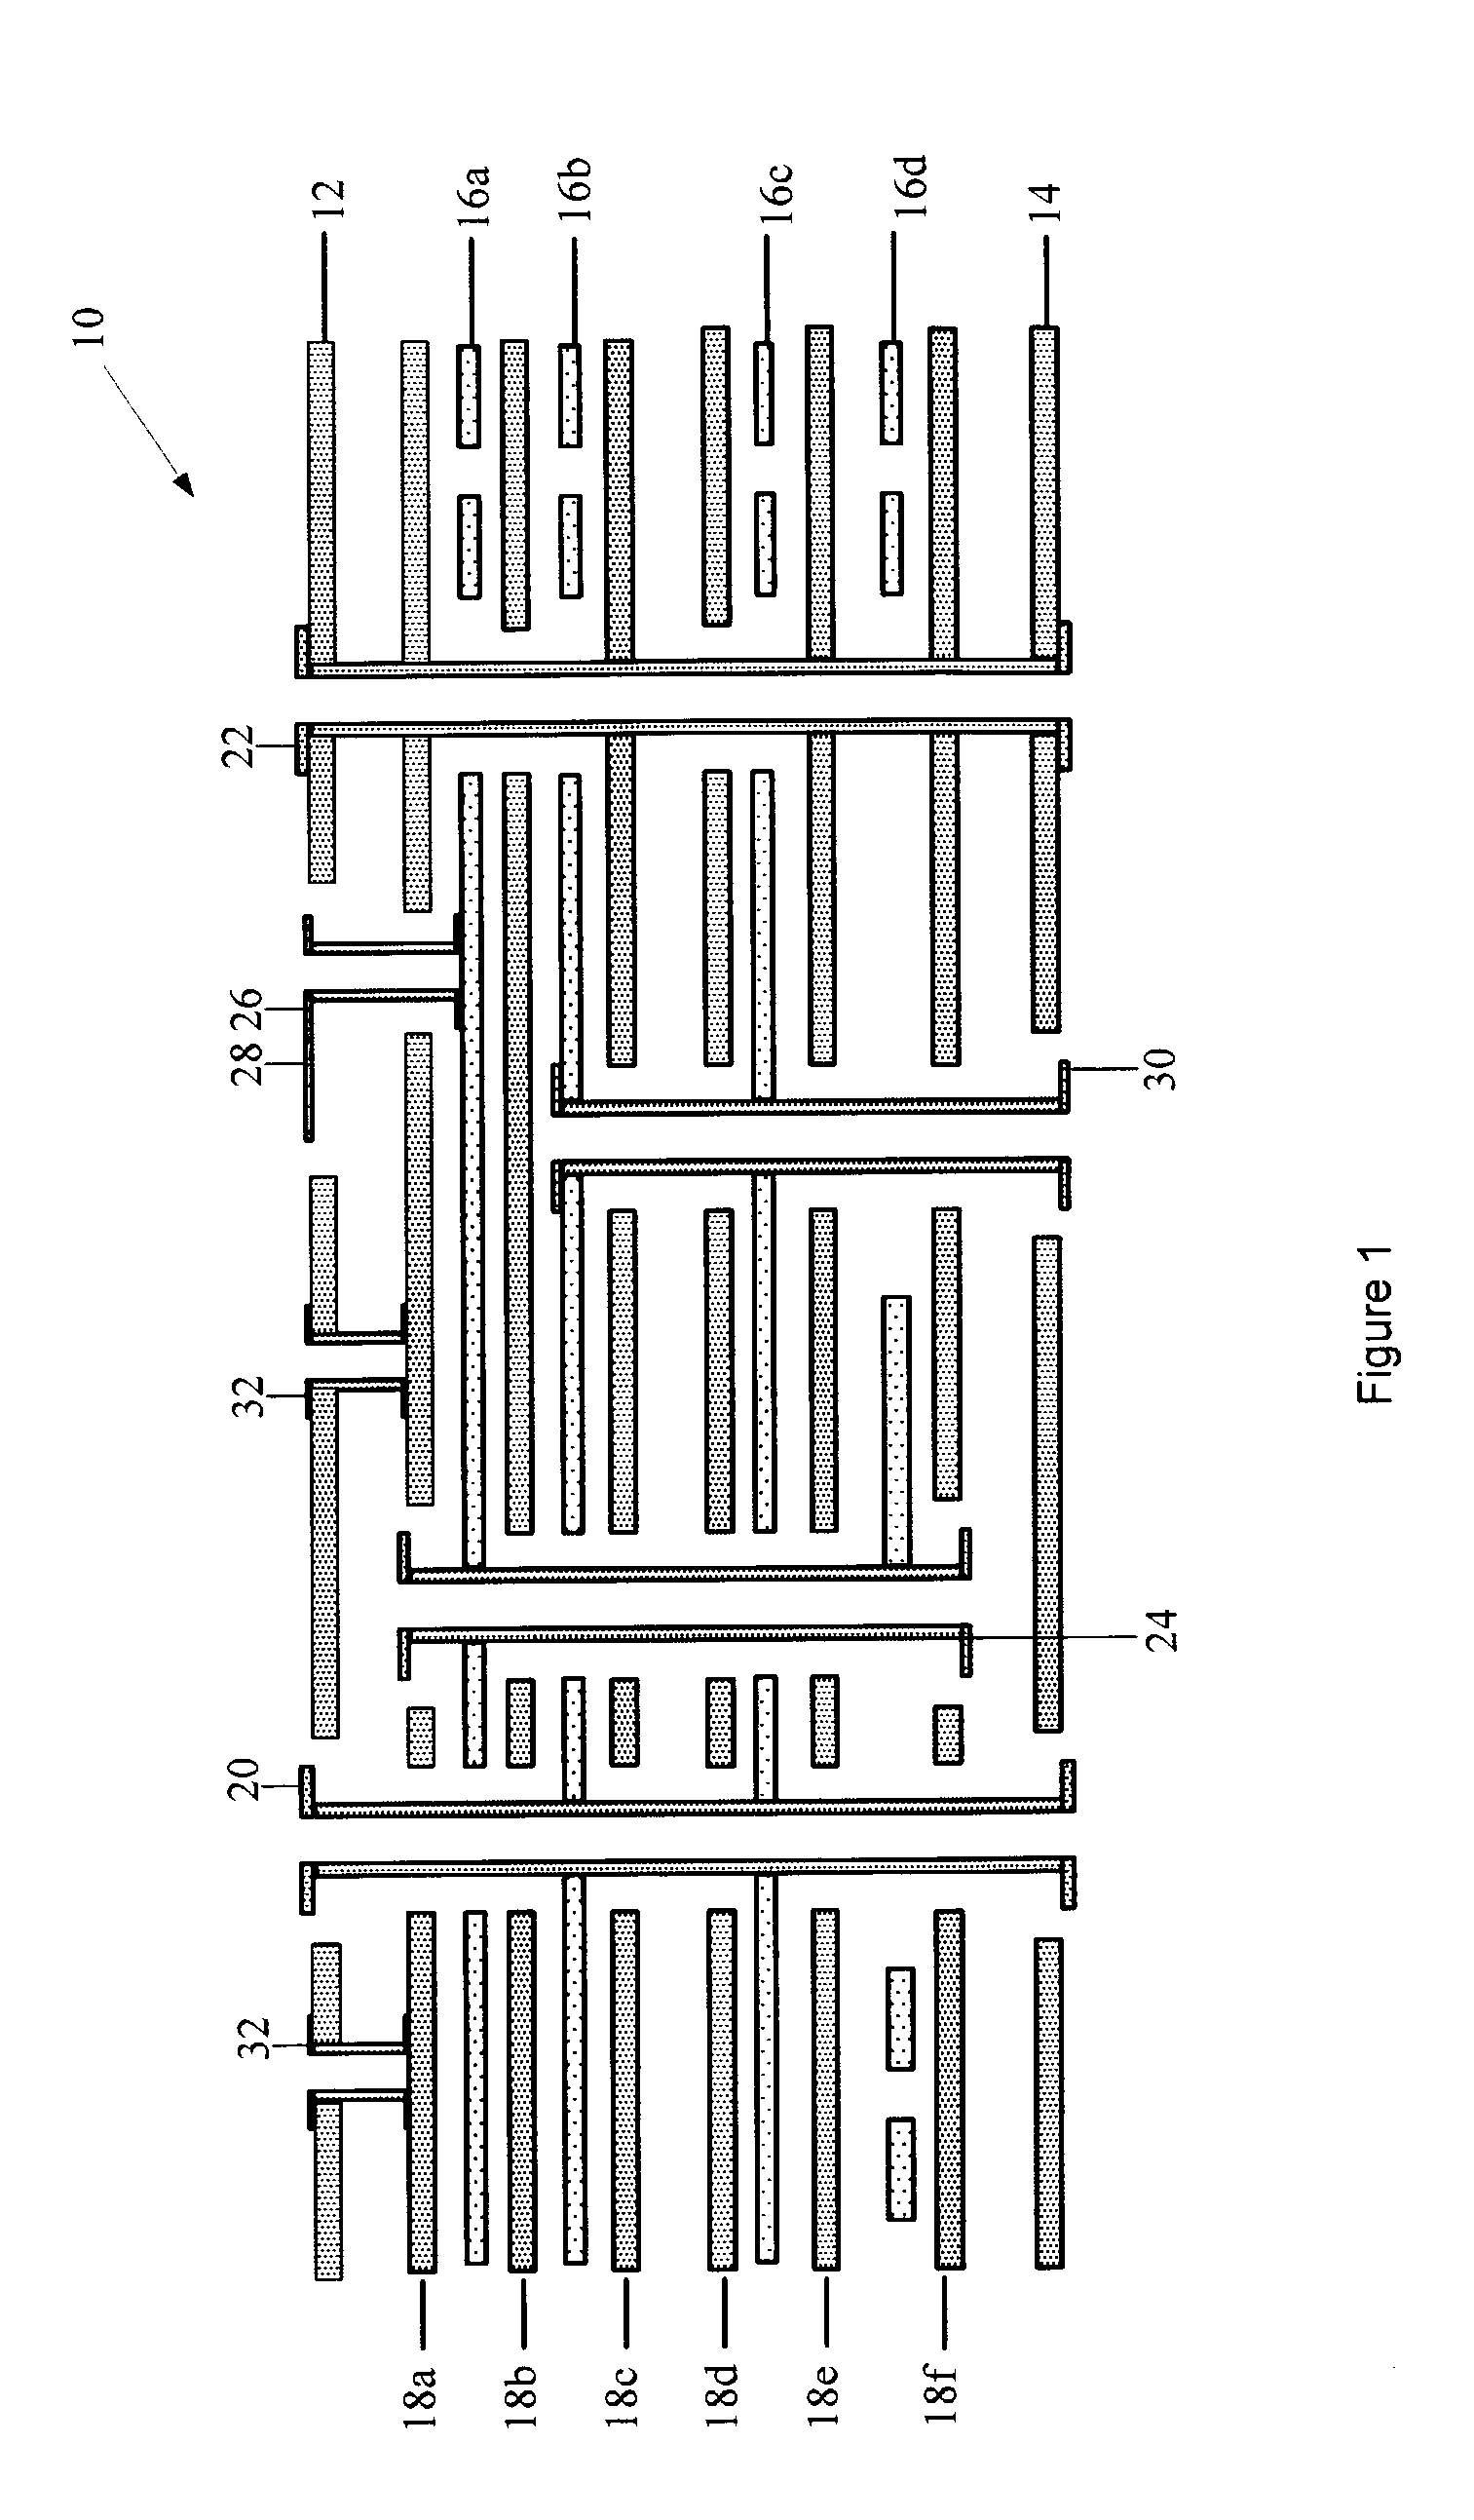 Techniques for reducing the number of layers in a multilayer signal routing device